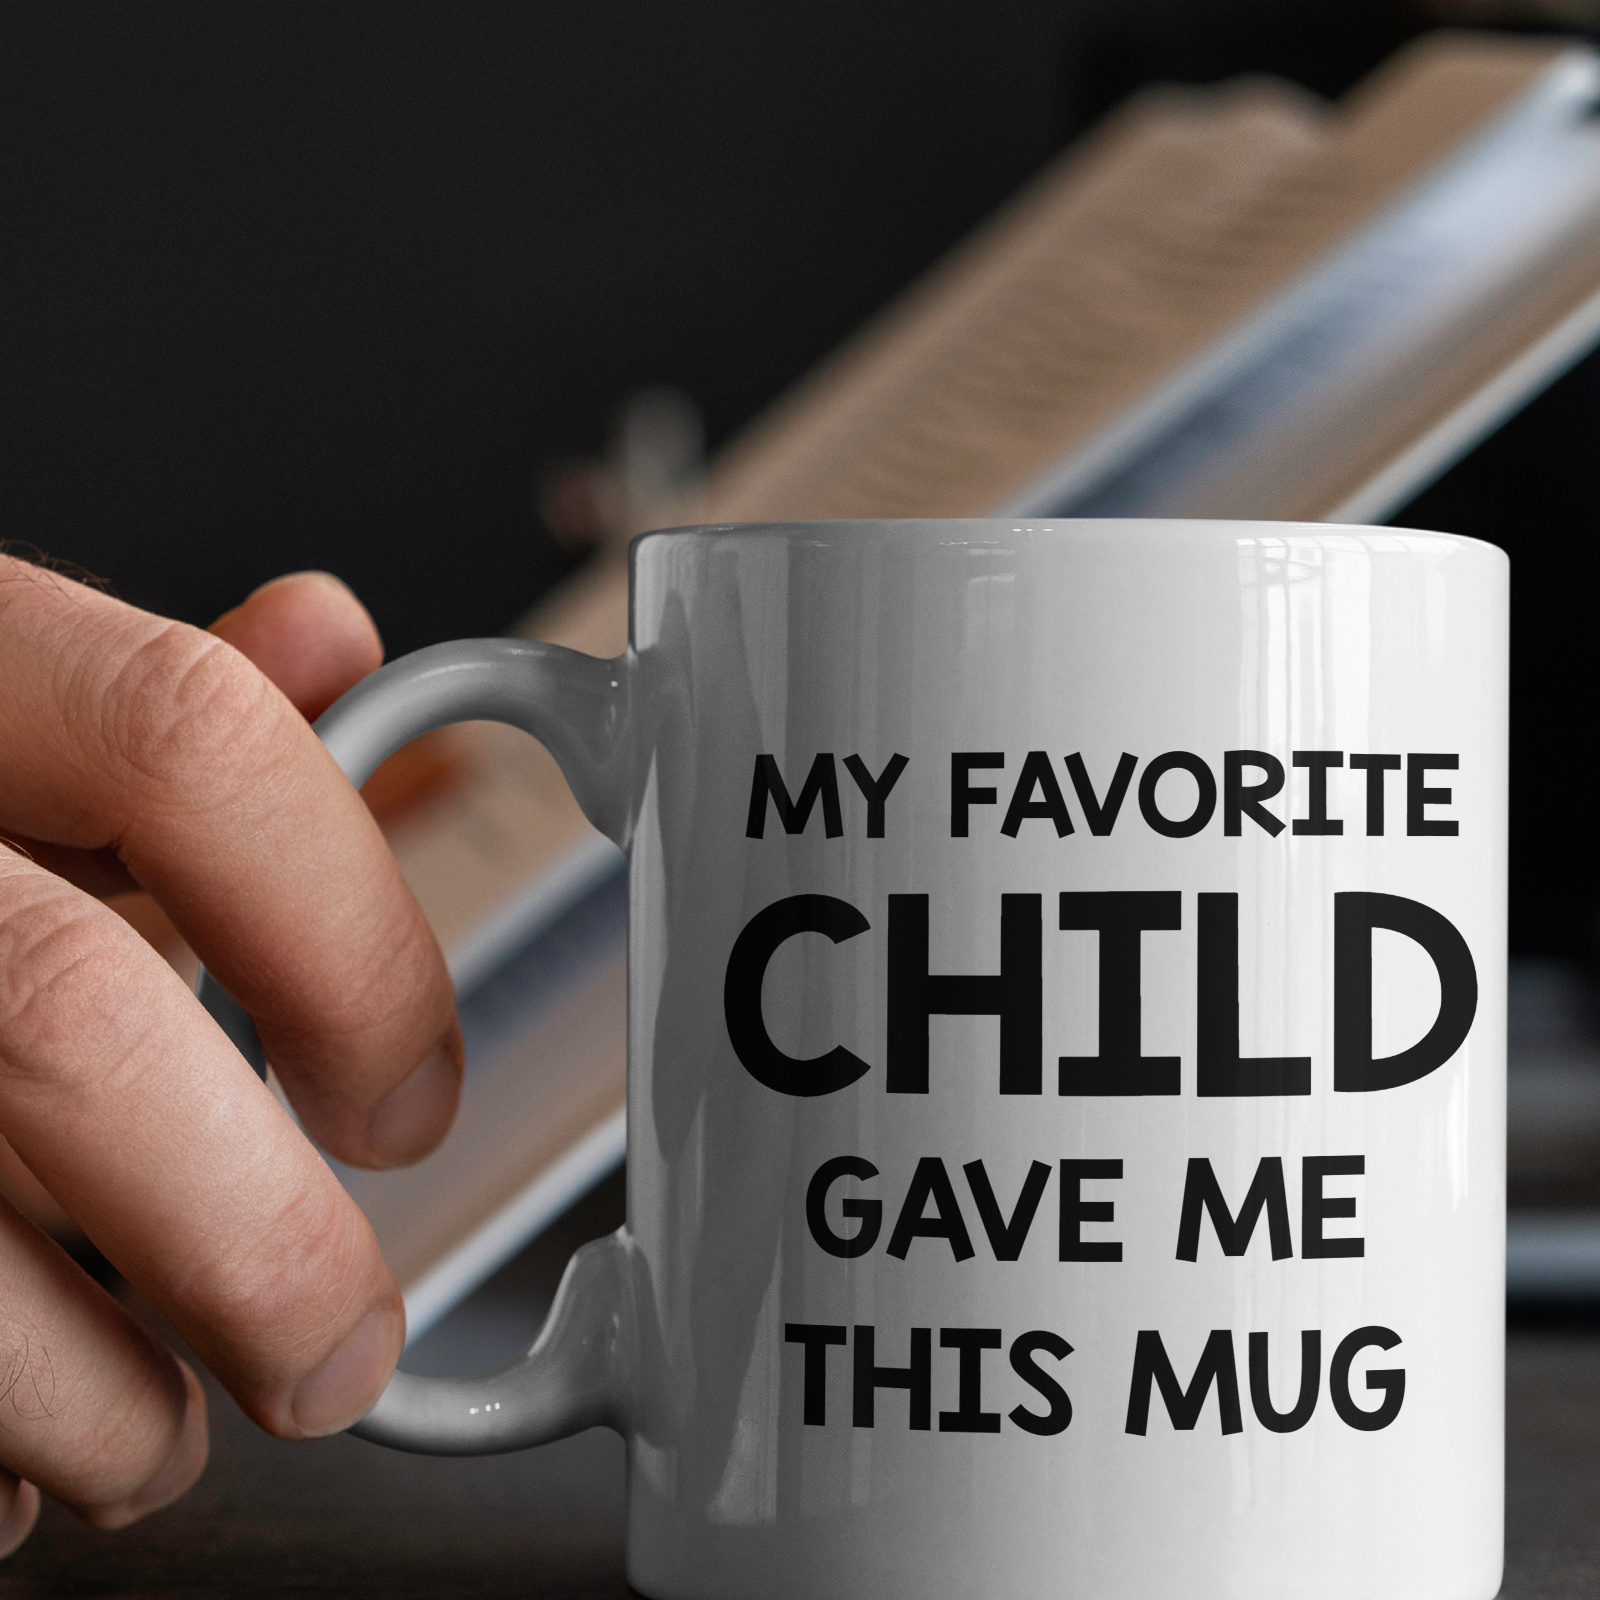 kids drinking cup Kids Drinking Cup Toddler Mugs for Hot Drinks